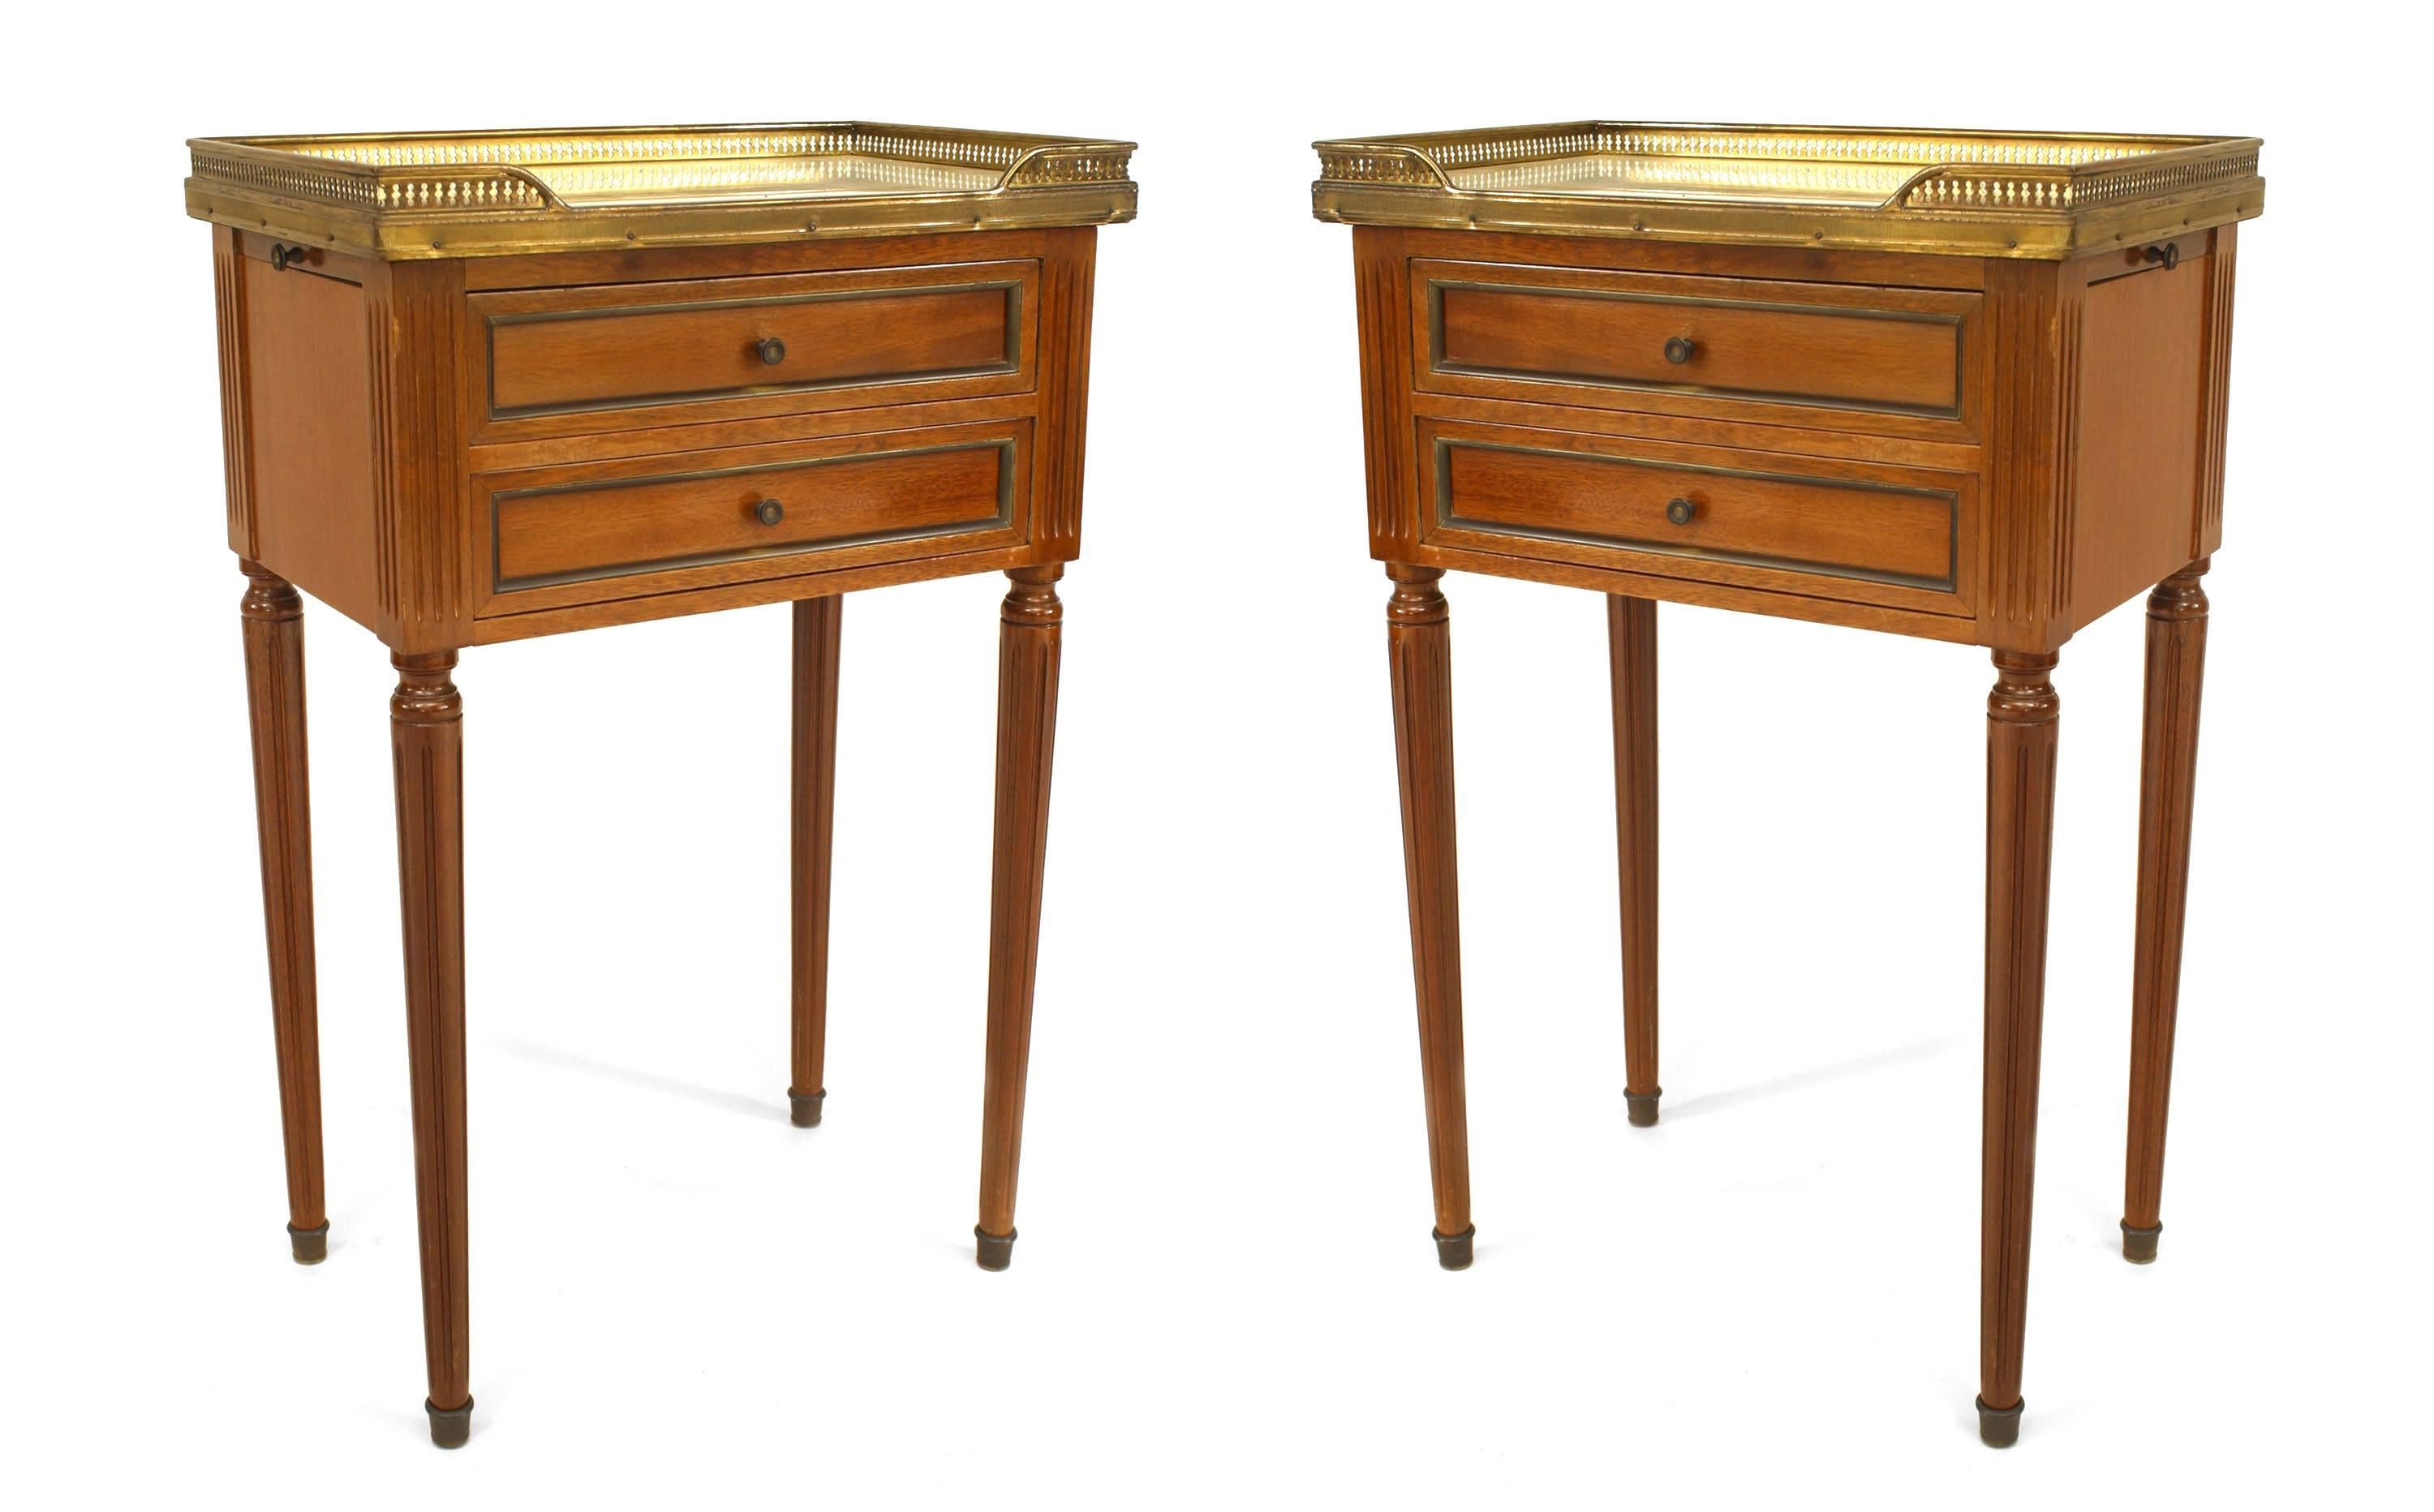 Pair of French Louis XVI-style walnut low end tables with brass trim and 2 drawers with a white marble top and filigree gallery. (PRICED AS Pair)
